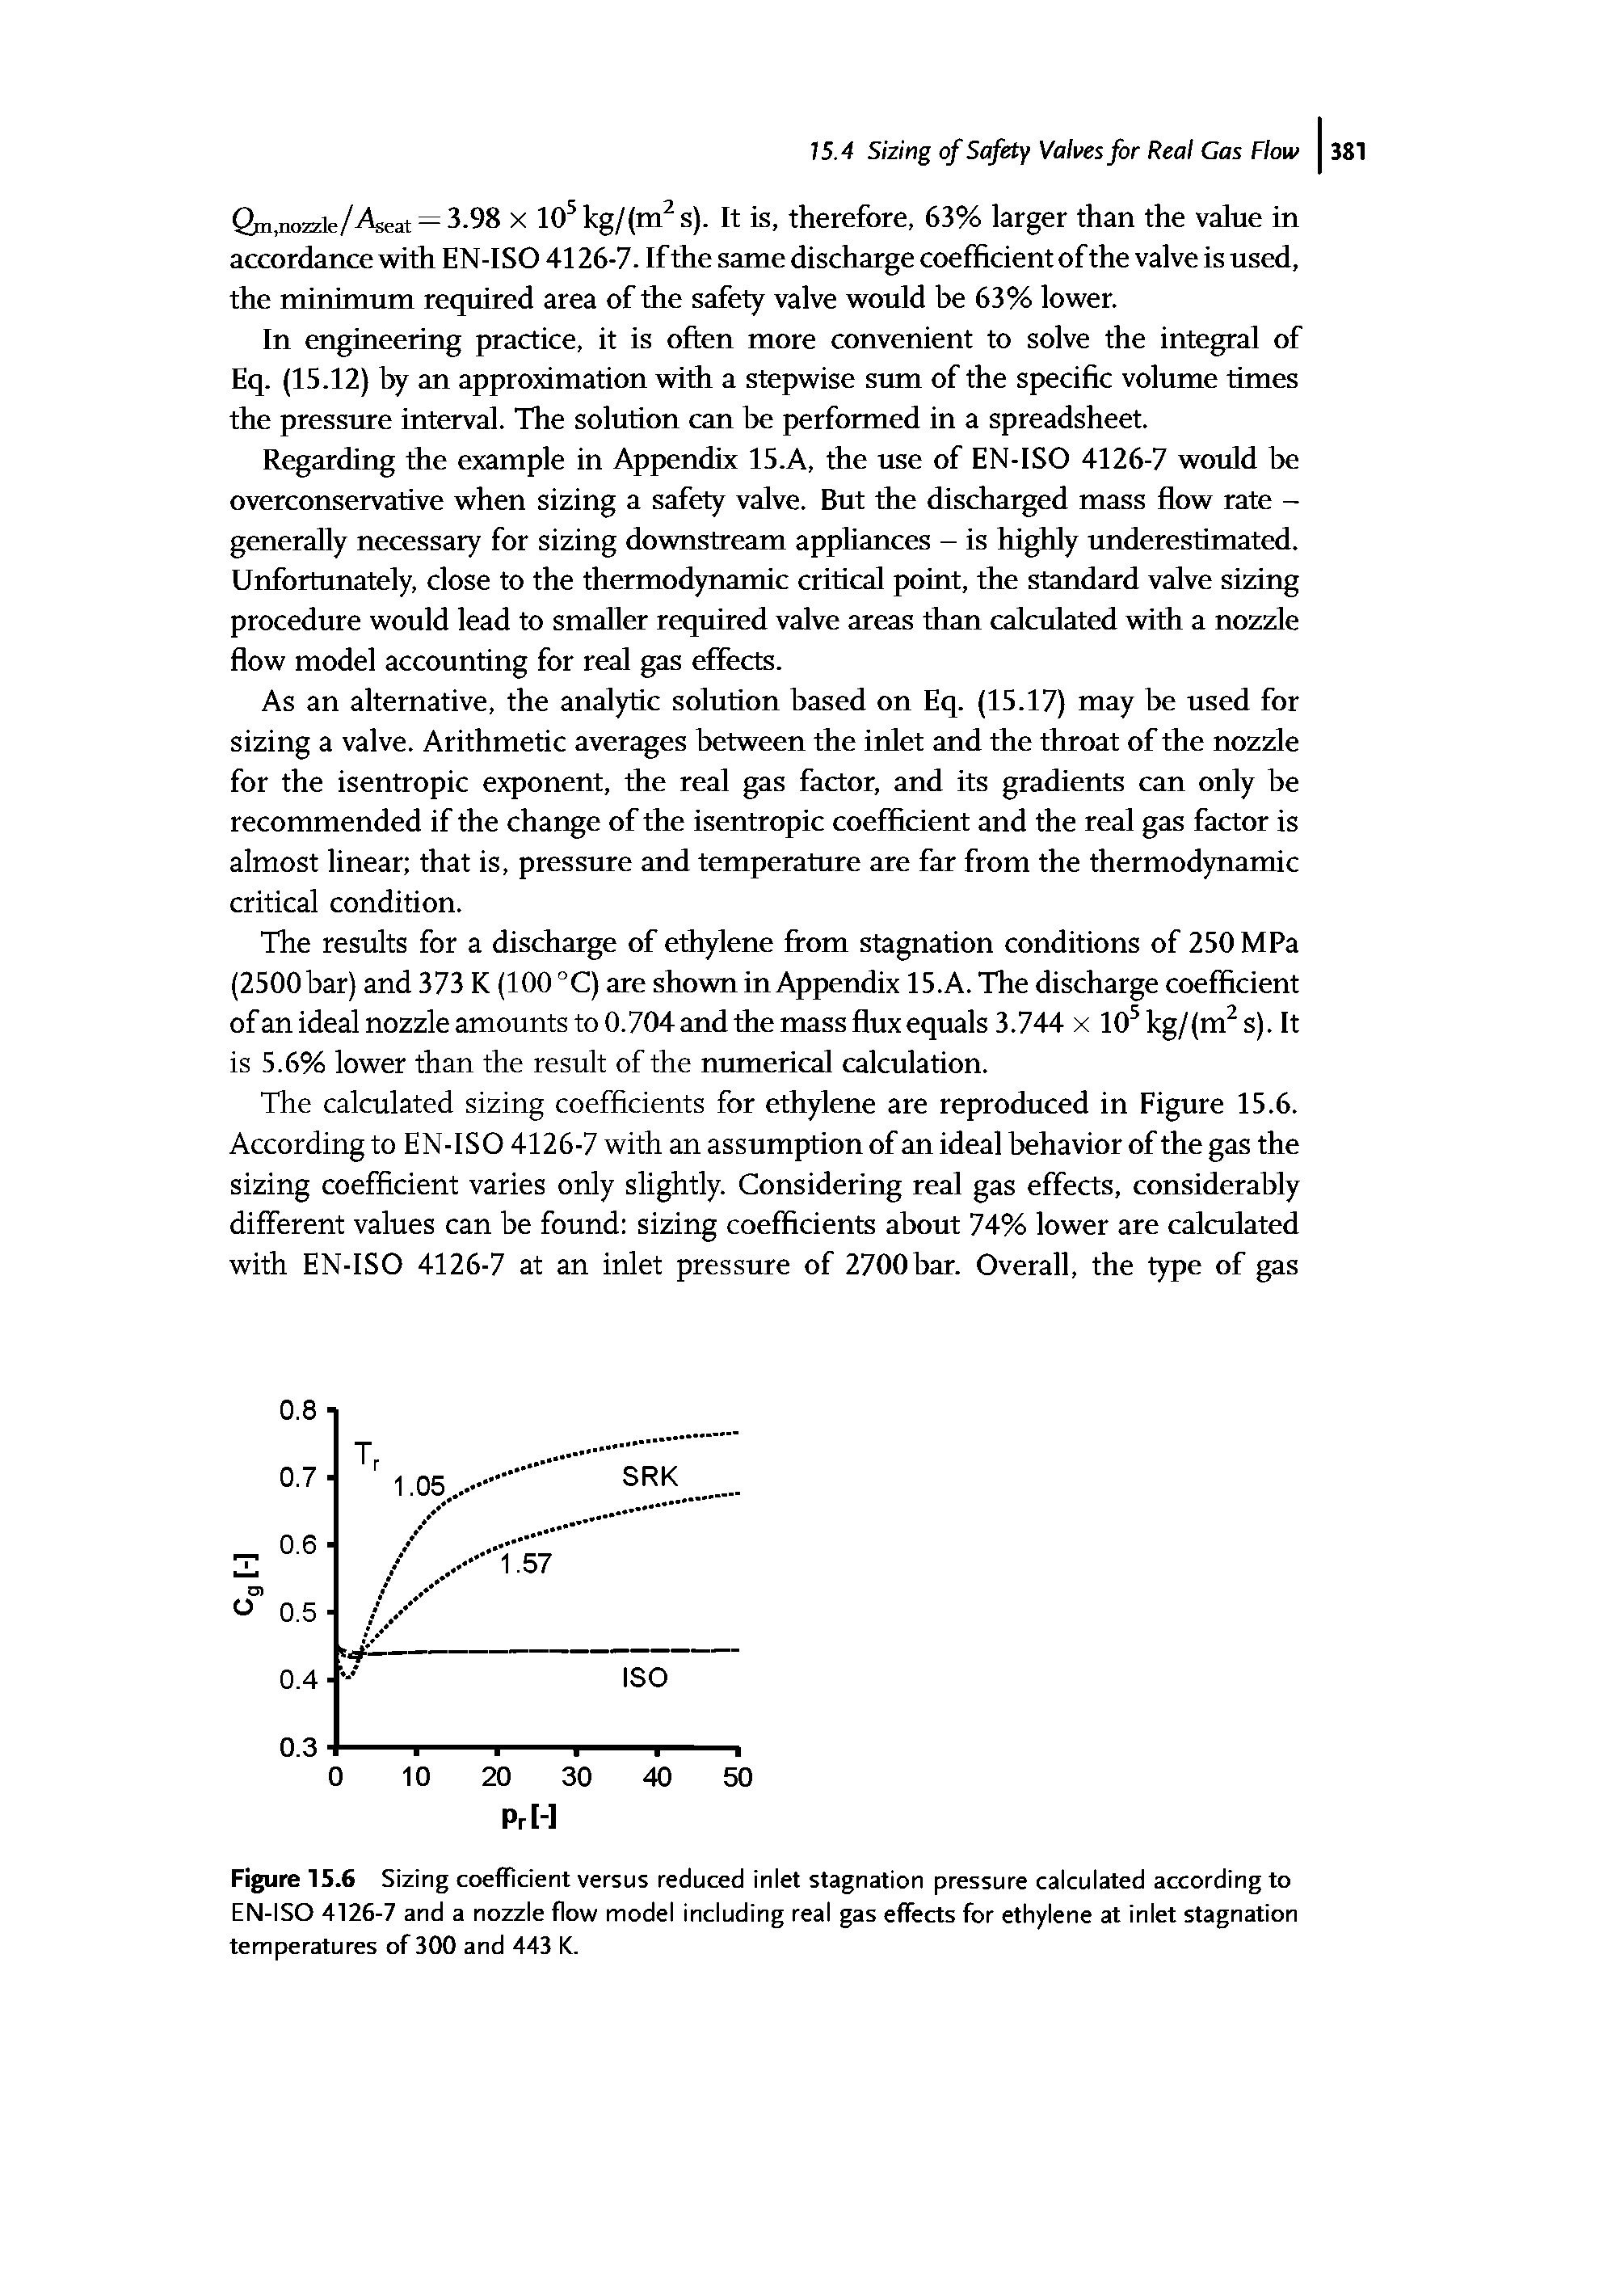 Figure 15.6 Sizing coefficient versus reduced inlet stagnation pressure calculated according to EN-ISO 4126-7 and a nozzle flow model including real gas effects for ethylene at inlet stagnation temperatures of 300 and 443 K.